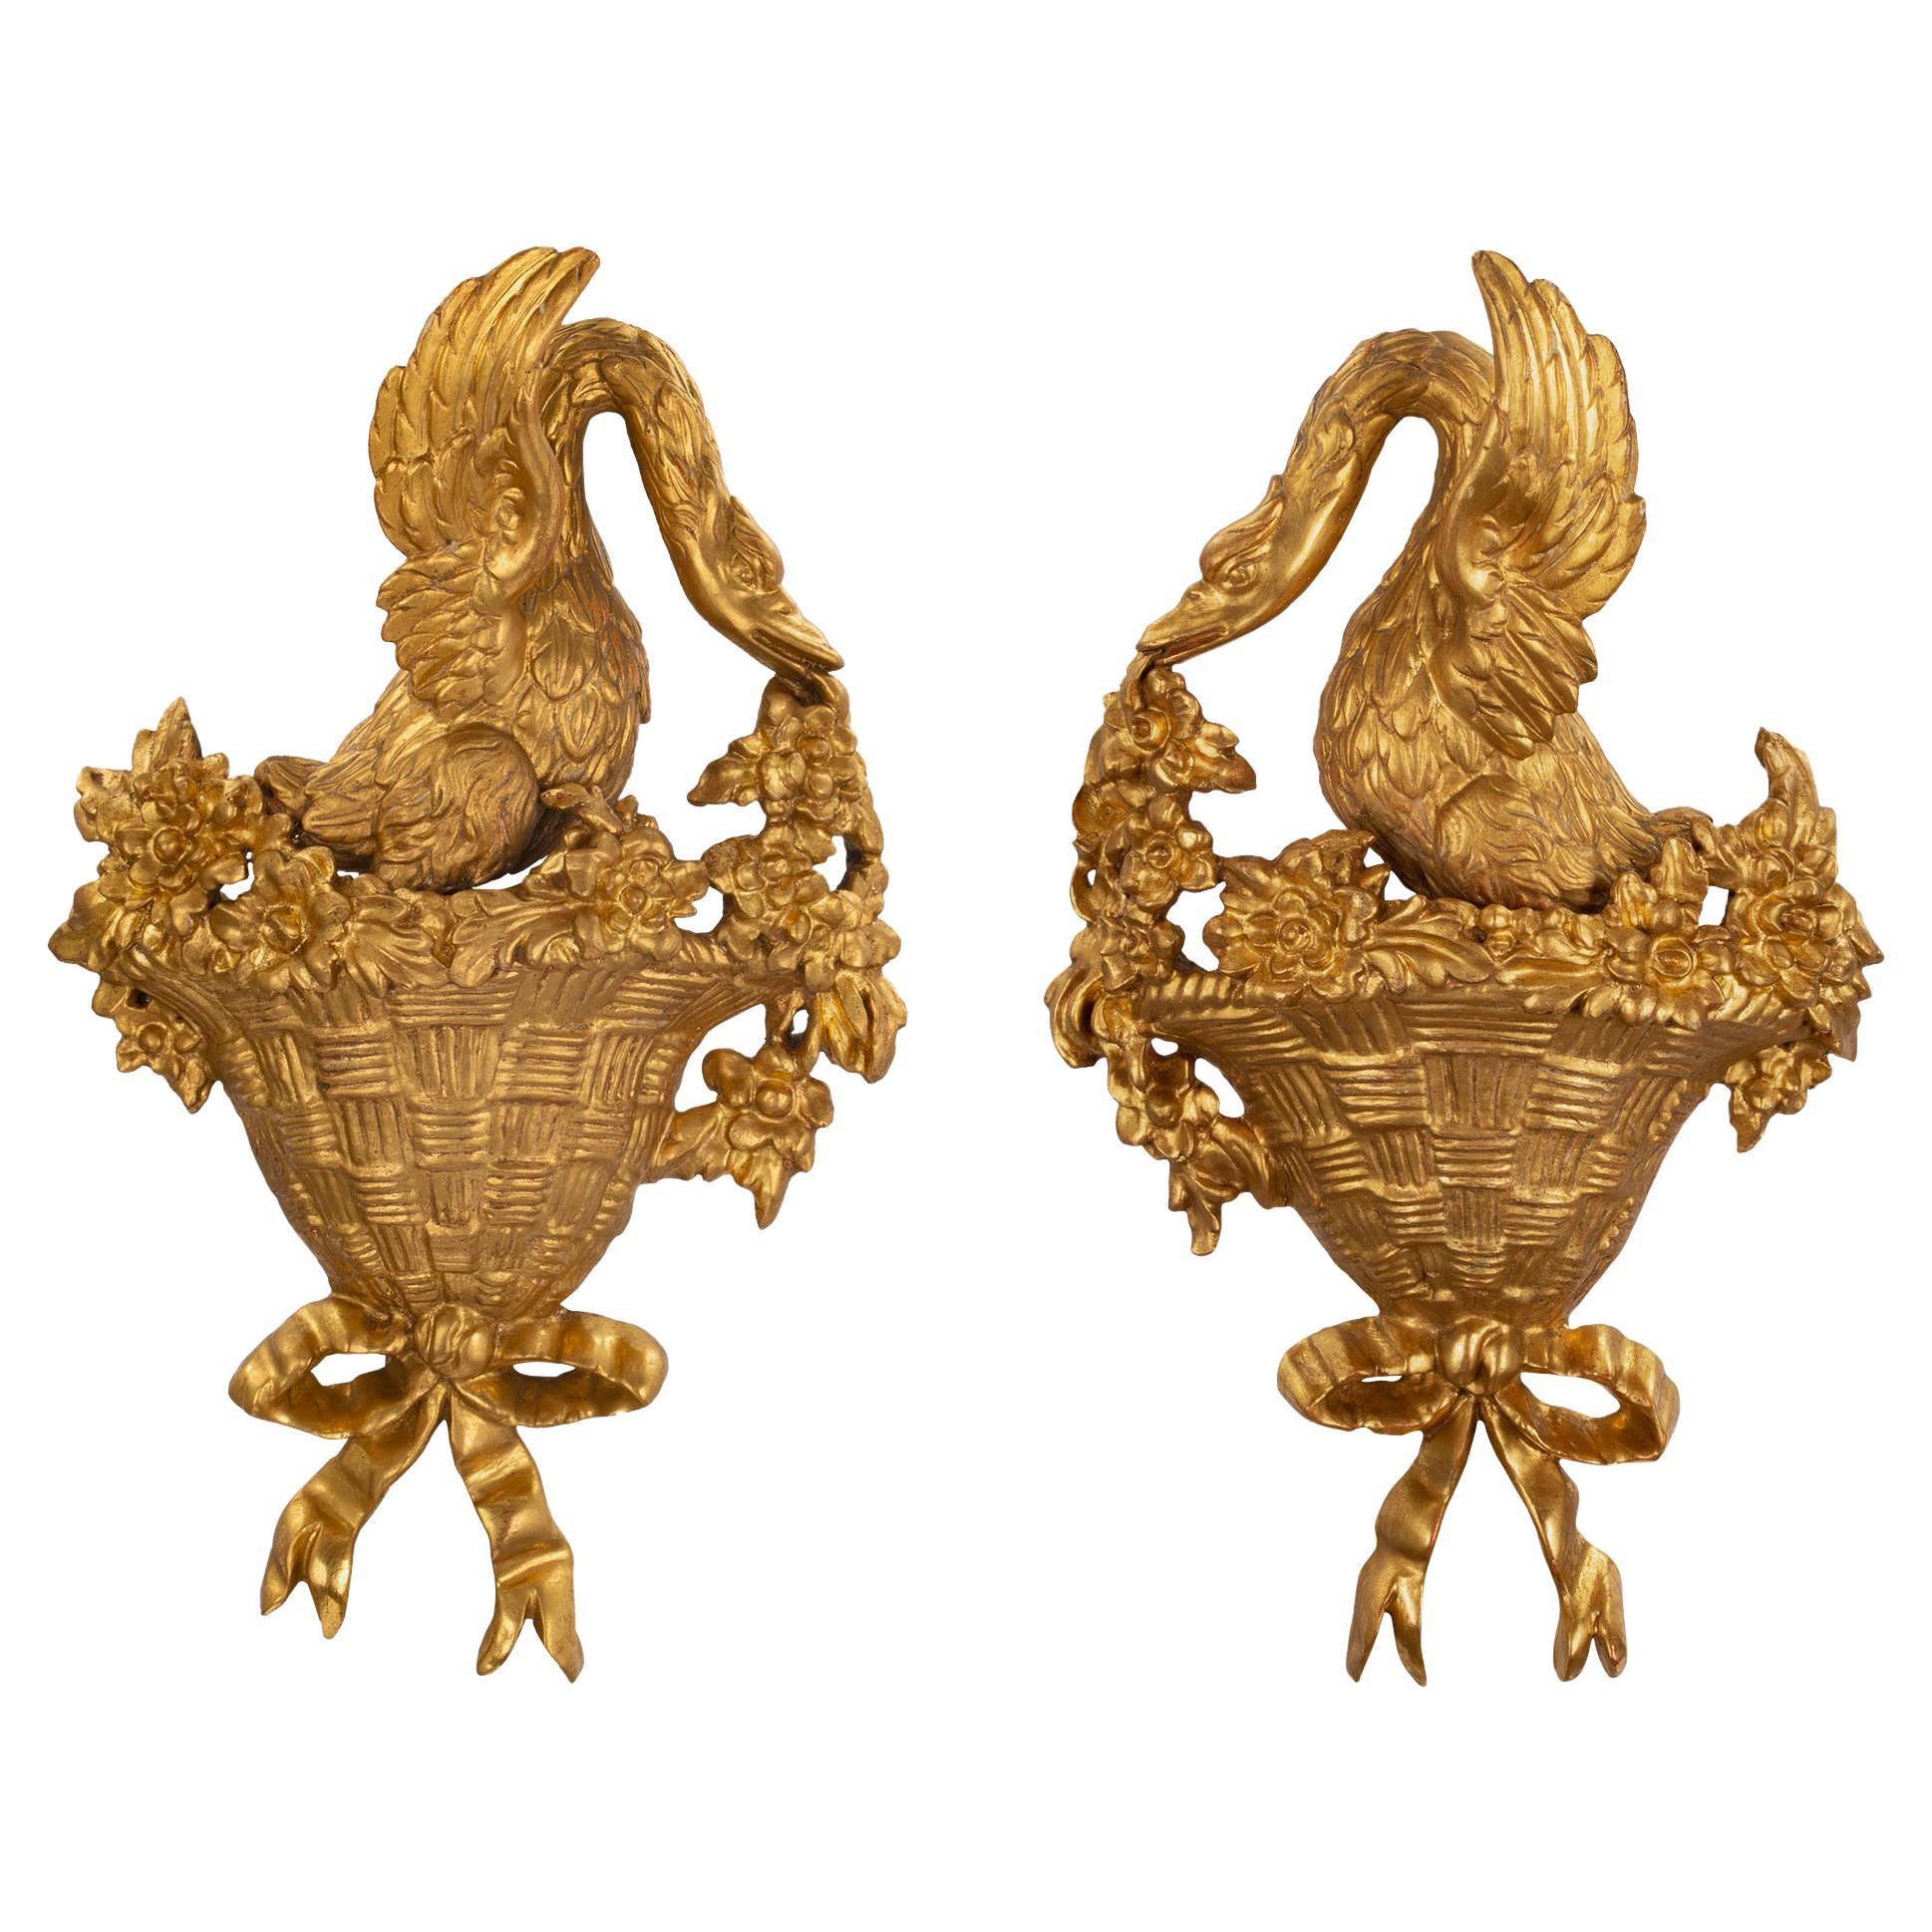 Pair of Italian Louis XVI St. Carved Giltwood Wall Decor For Sale